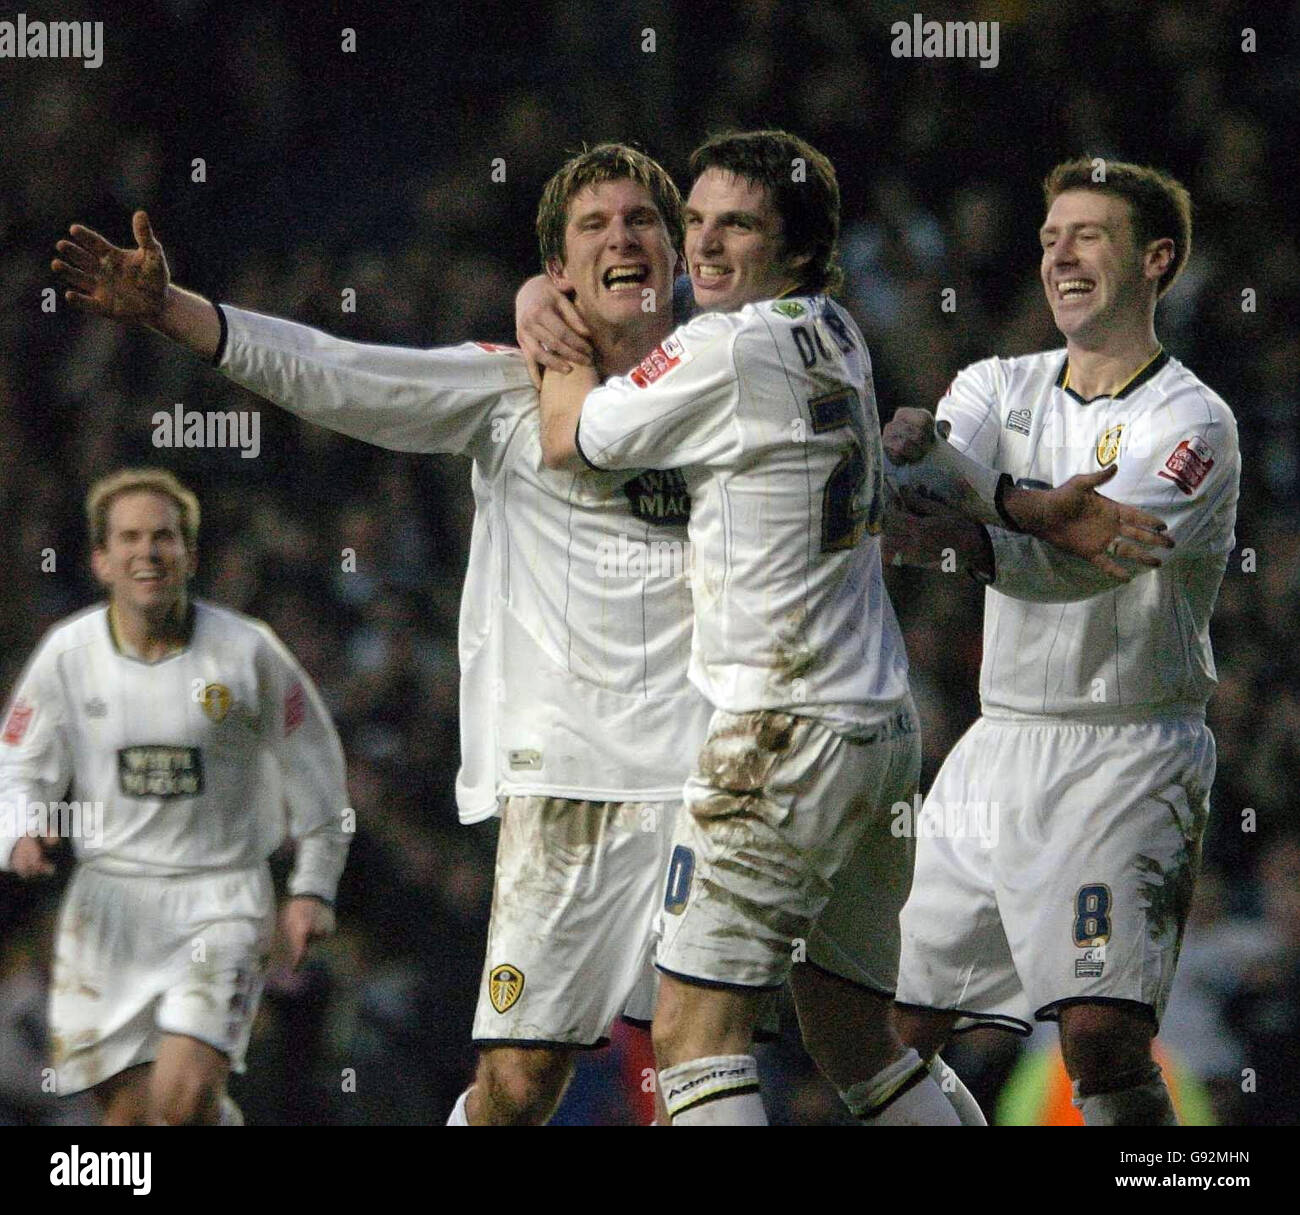 Leeds United's Richard Cresswell (L) celebrates scoring the second goal against Sheffield Wednesday with team-mates Jonathan Douglas (C) and Sean Gregan during the Coca-Cola Championship match at Elland Road, Leeds, Saturday January 21, 2006. PRESS ASSOCIATION Photo. Photo credit should read: John Jones/PA NO UNOFFICIAL CLUB WEBSITE USE. Stock Photo